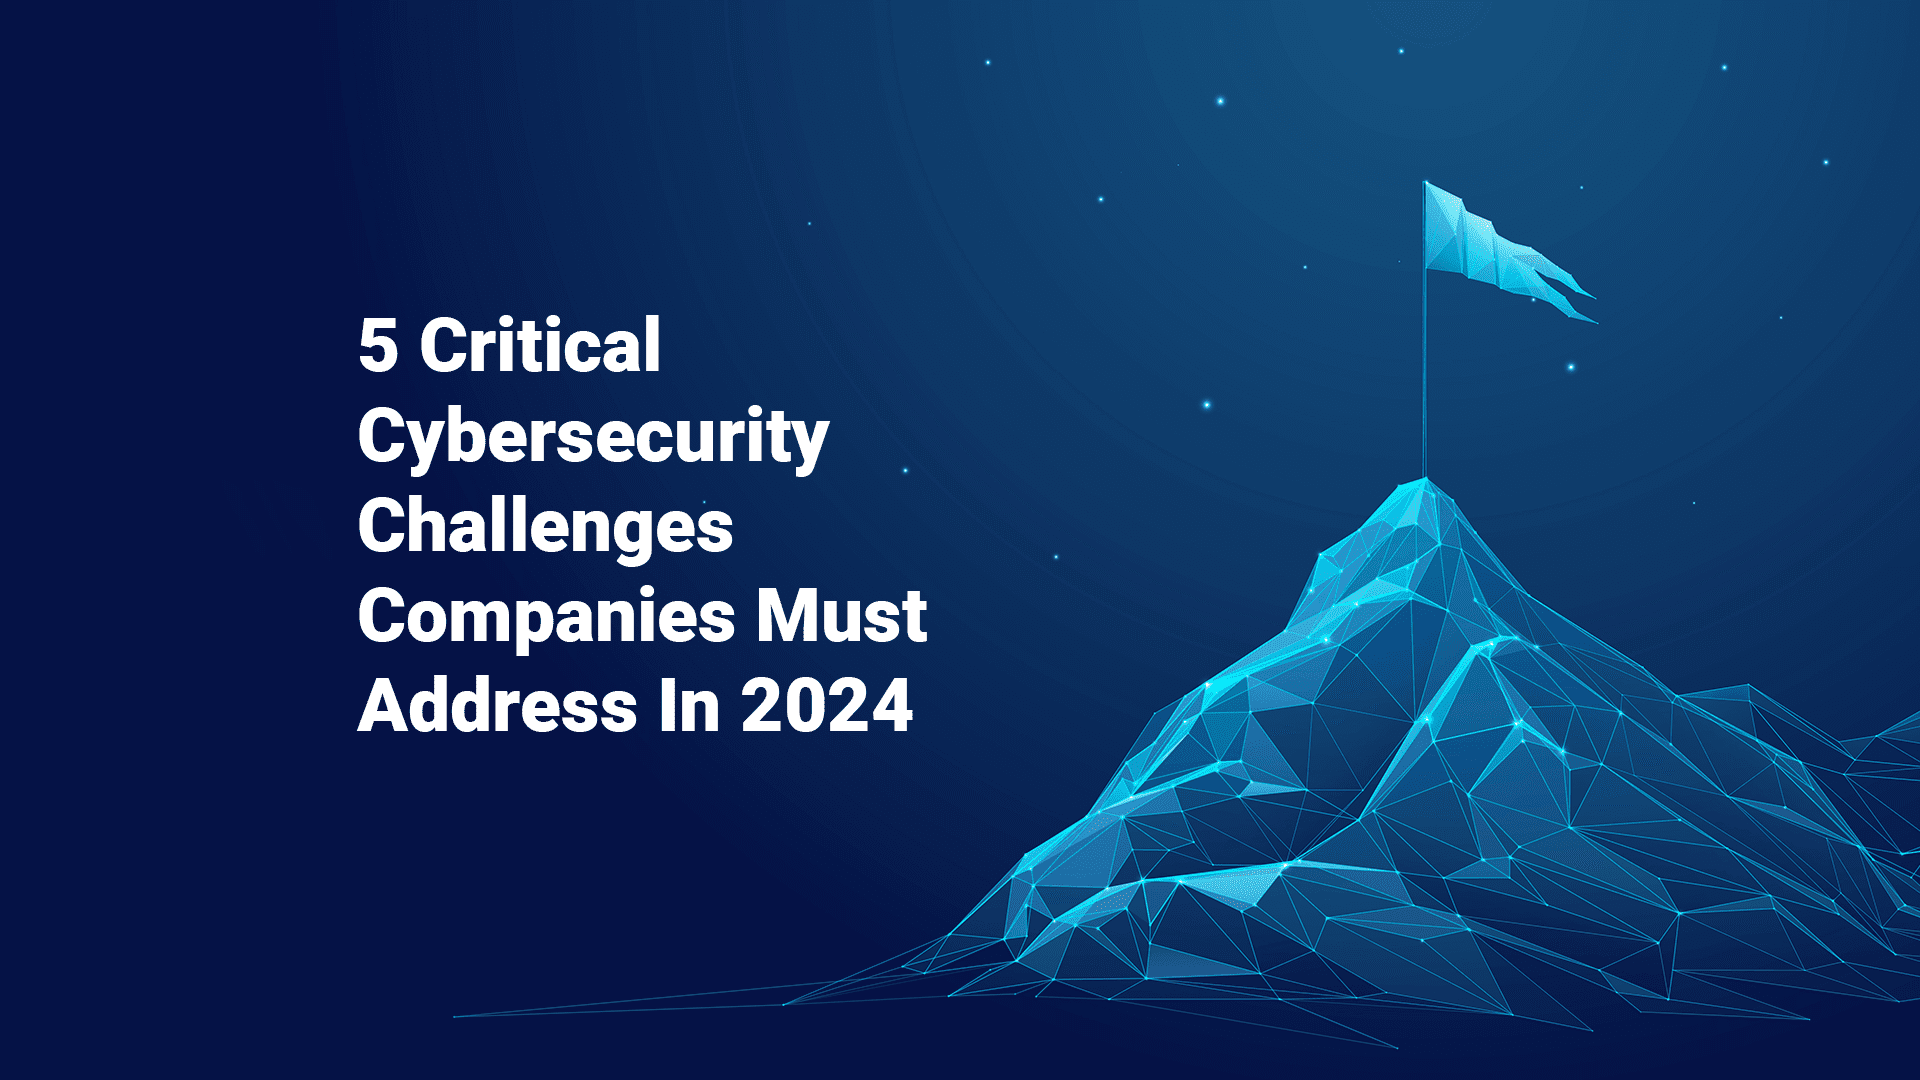 5 Critical Cybersecurity Challenges Companies Must Address In 2024